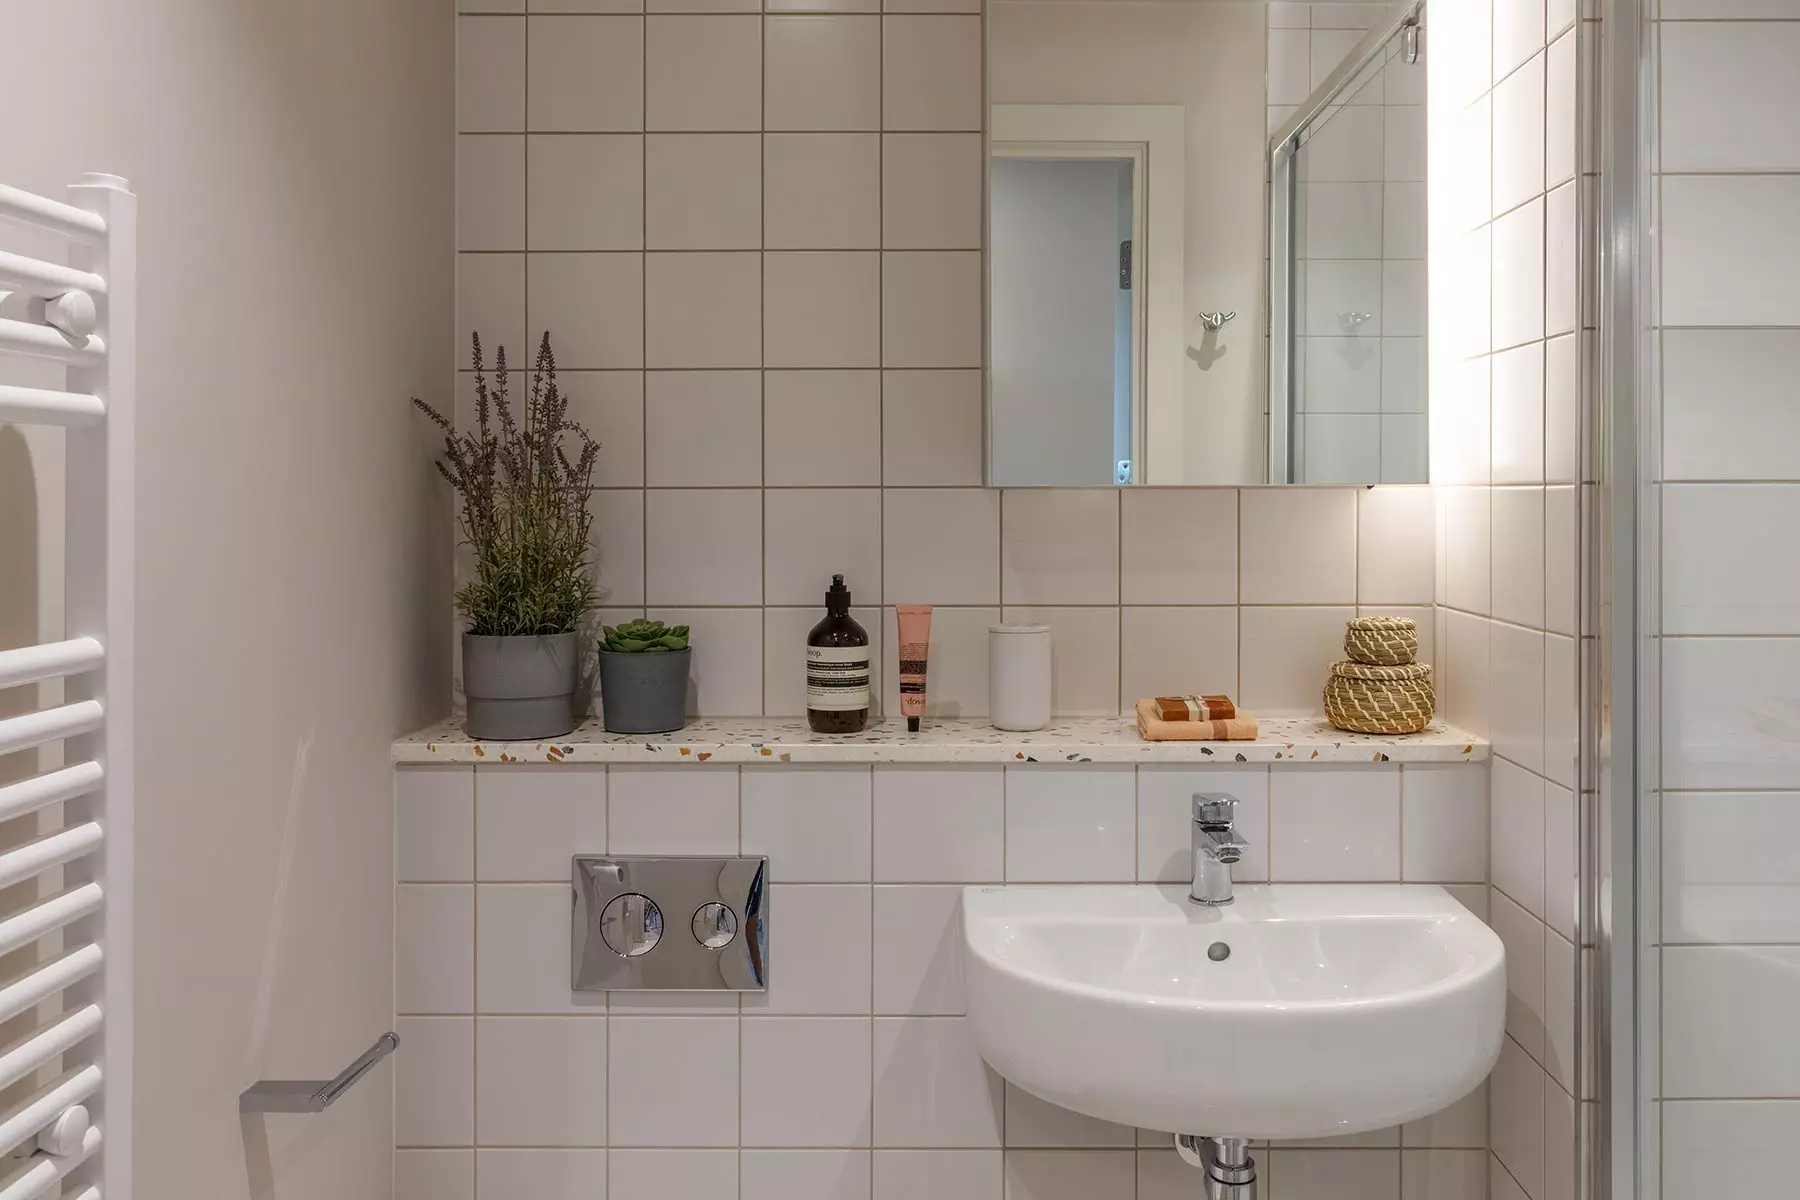 Keep up with your skincare ritual in your private bathroom